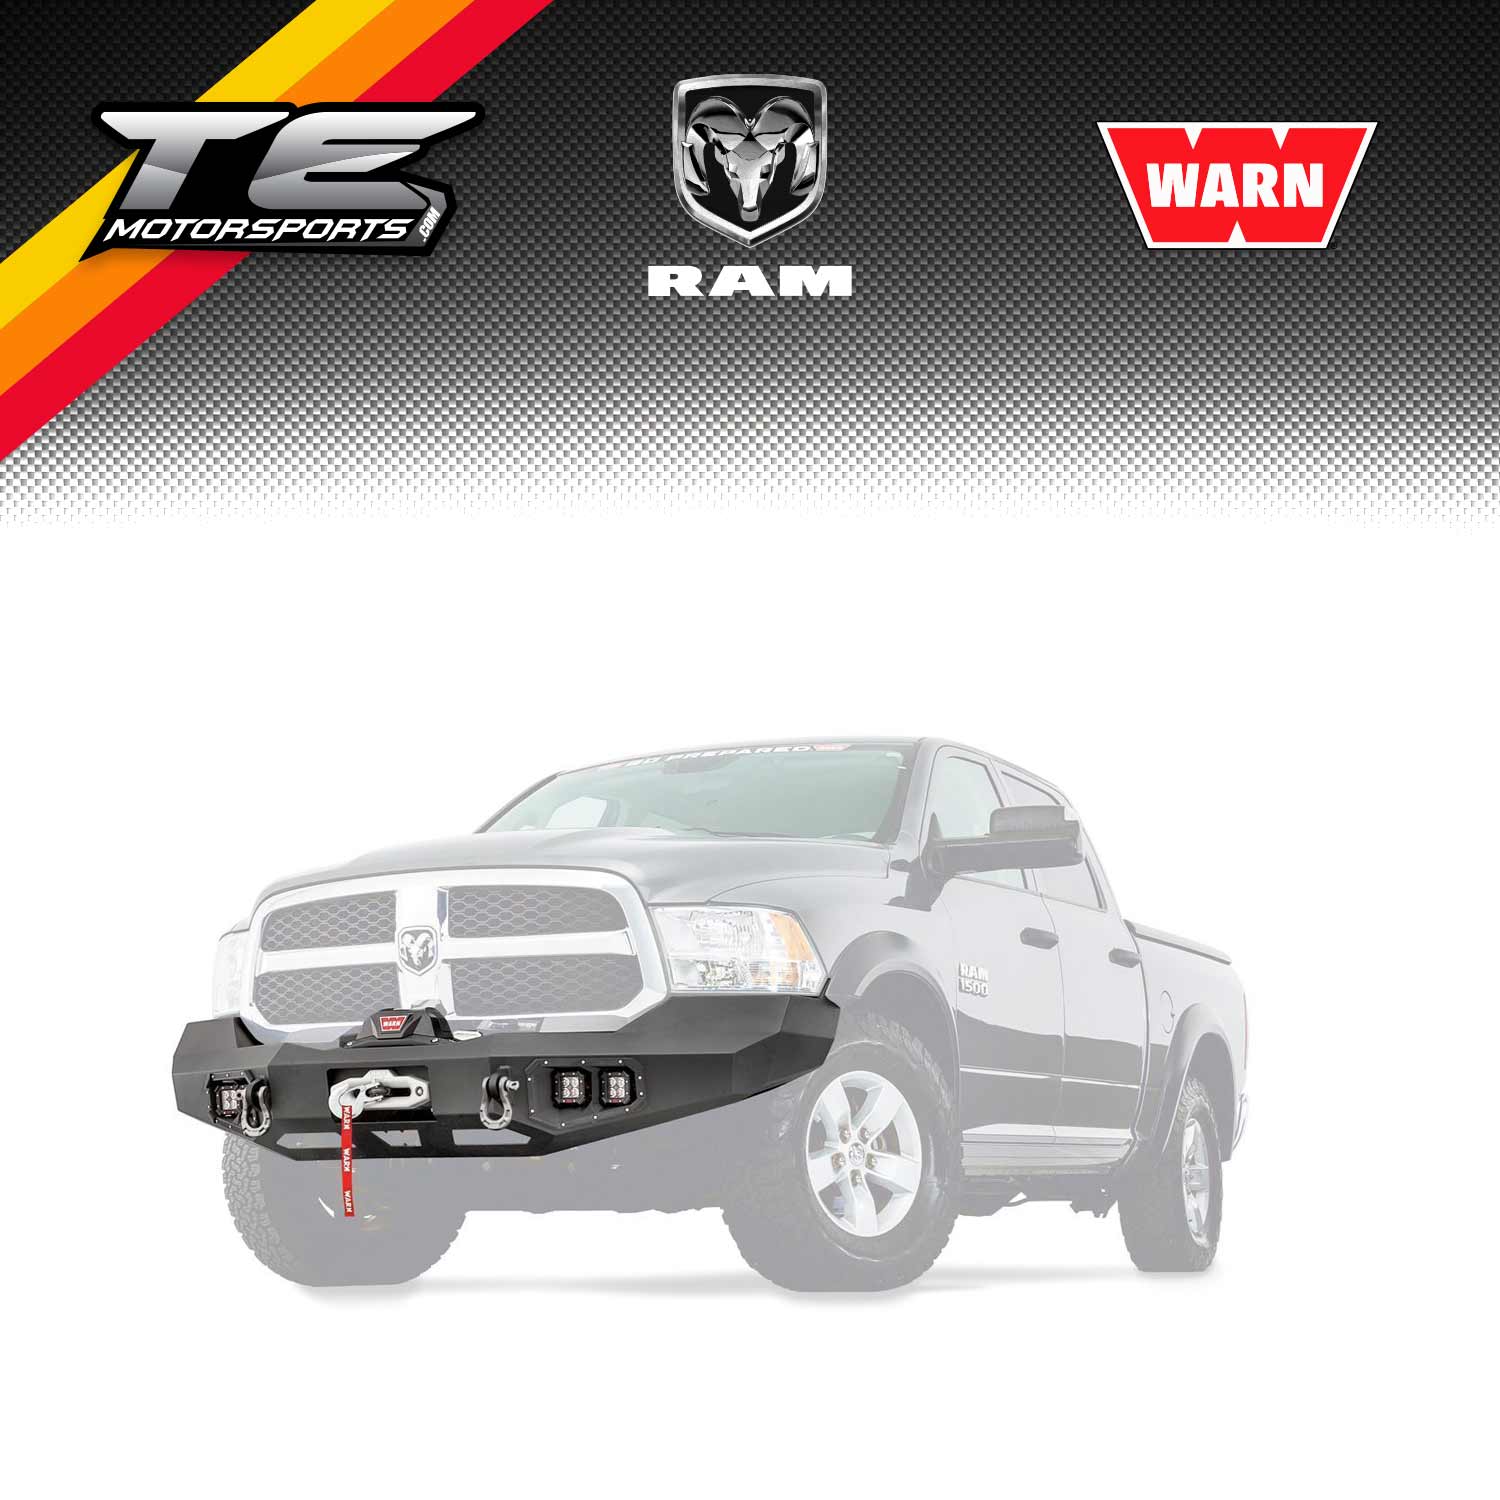 Warn ASCENT FRONT BUMPER FOR RAM 1500 - 100922